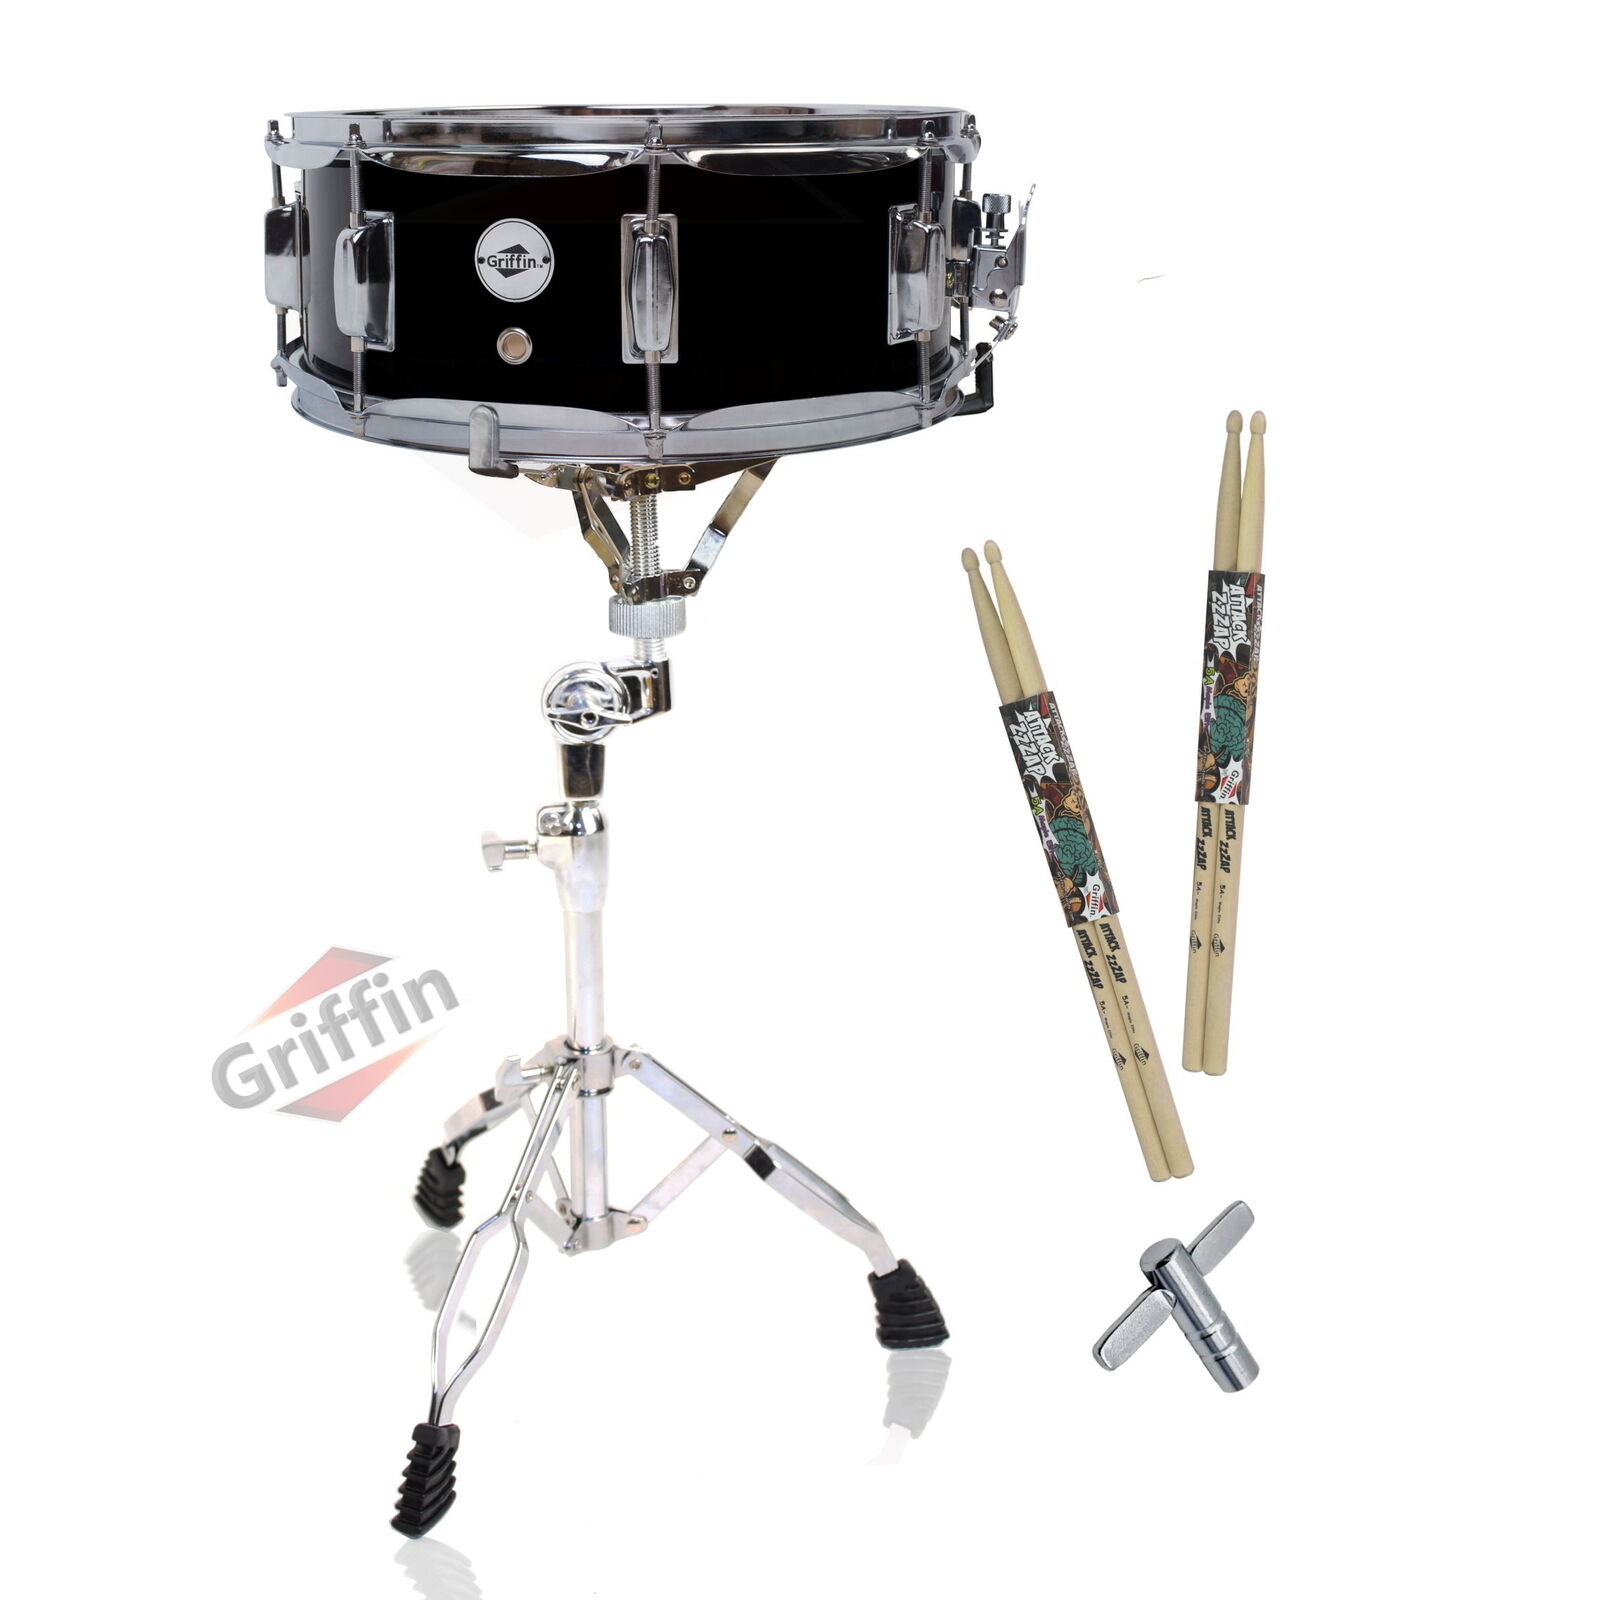 GRIFFIN Snare Drum Kit + Snare Stand, 2 Pairs Maple Wood Drum Sticks & Drum Key 1